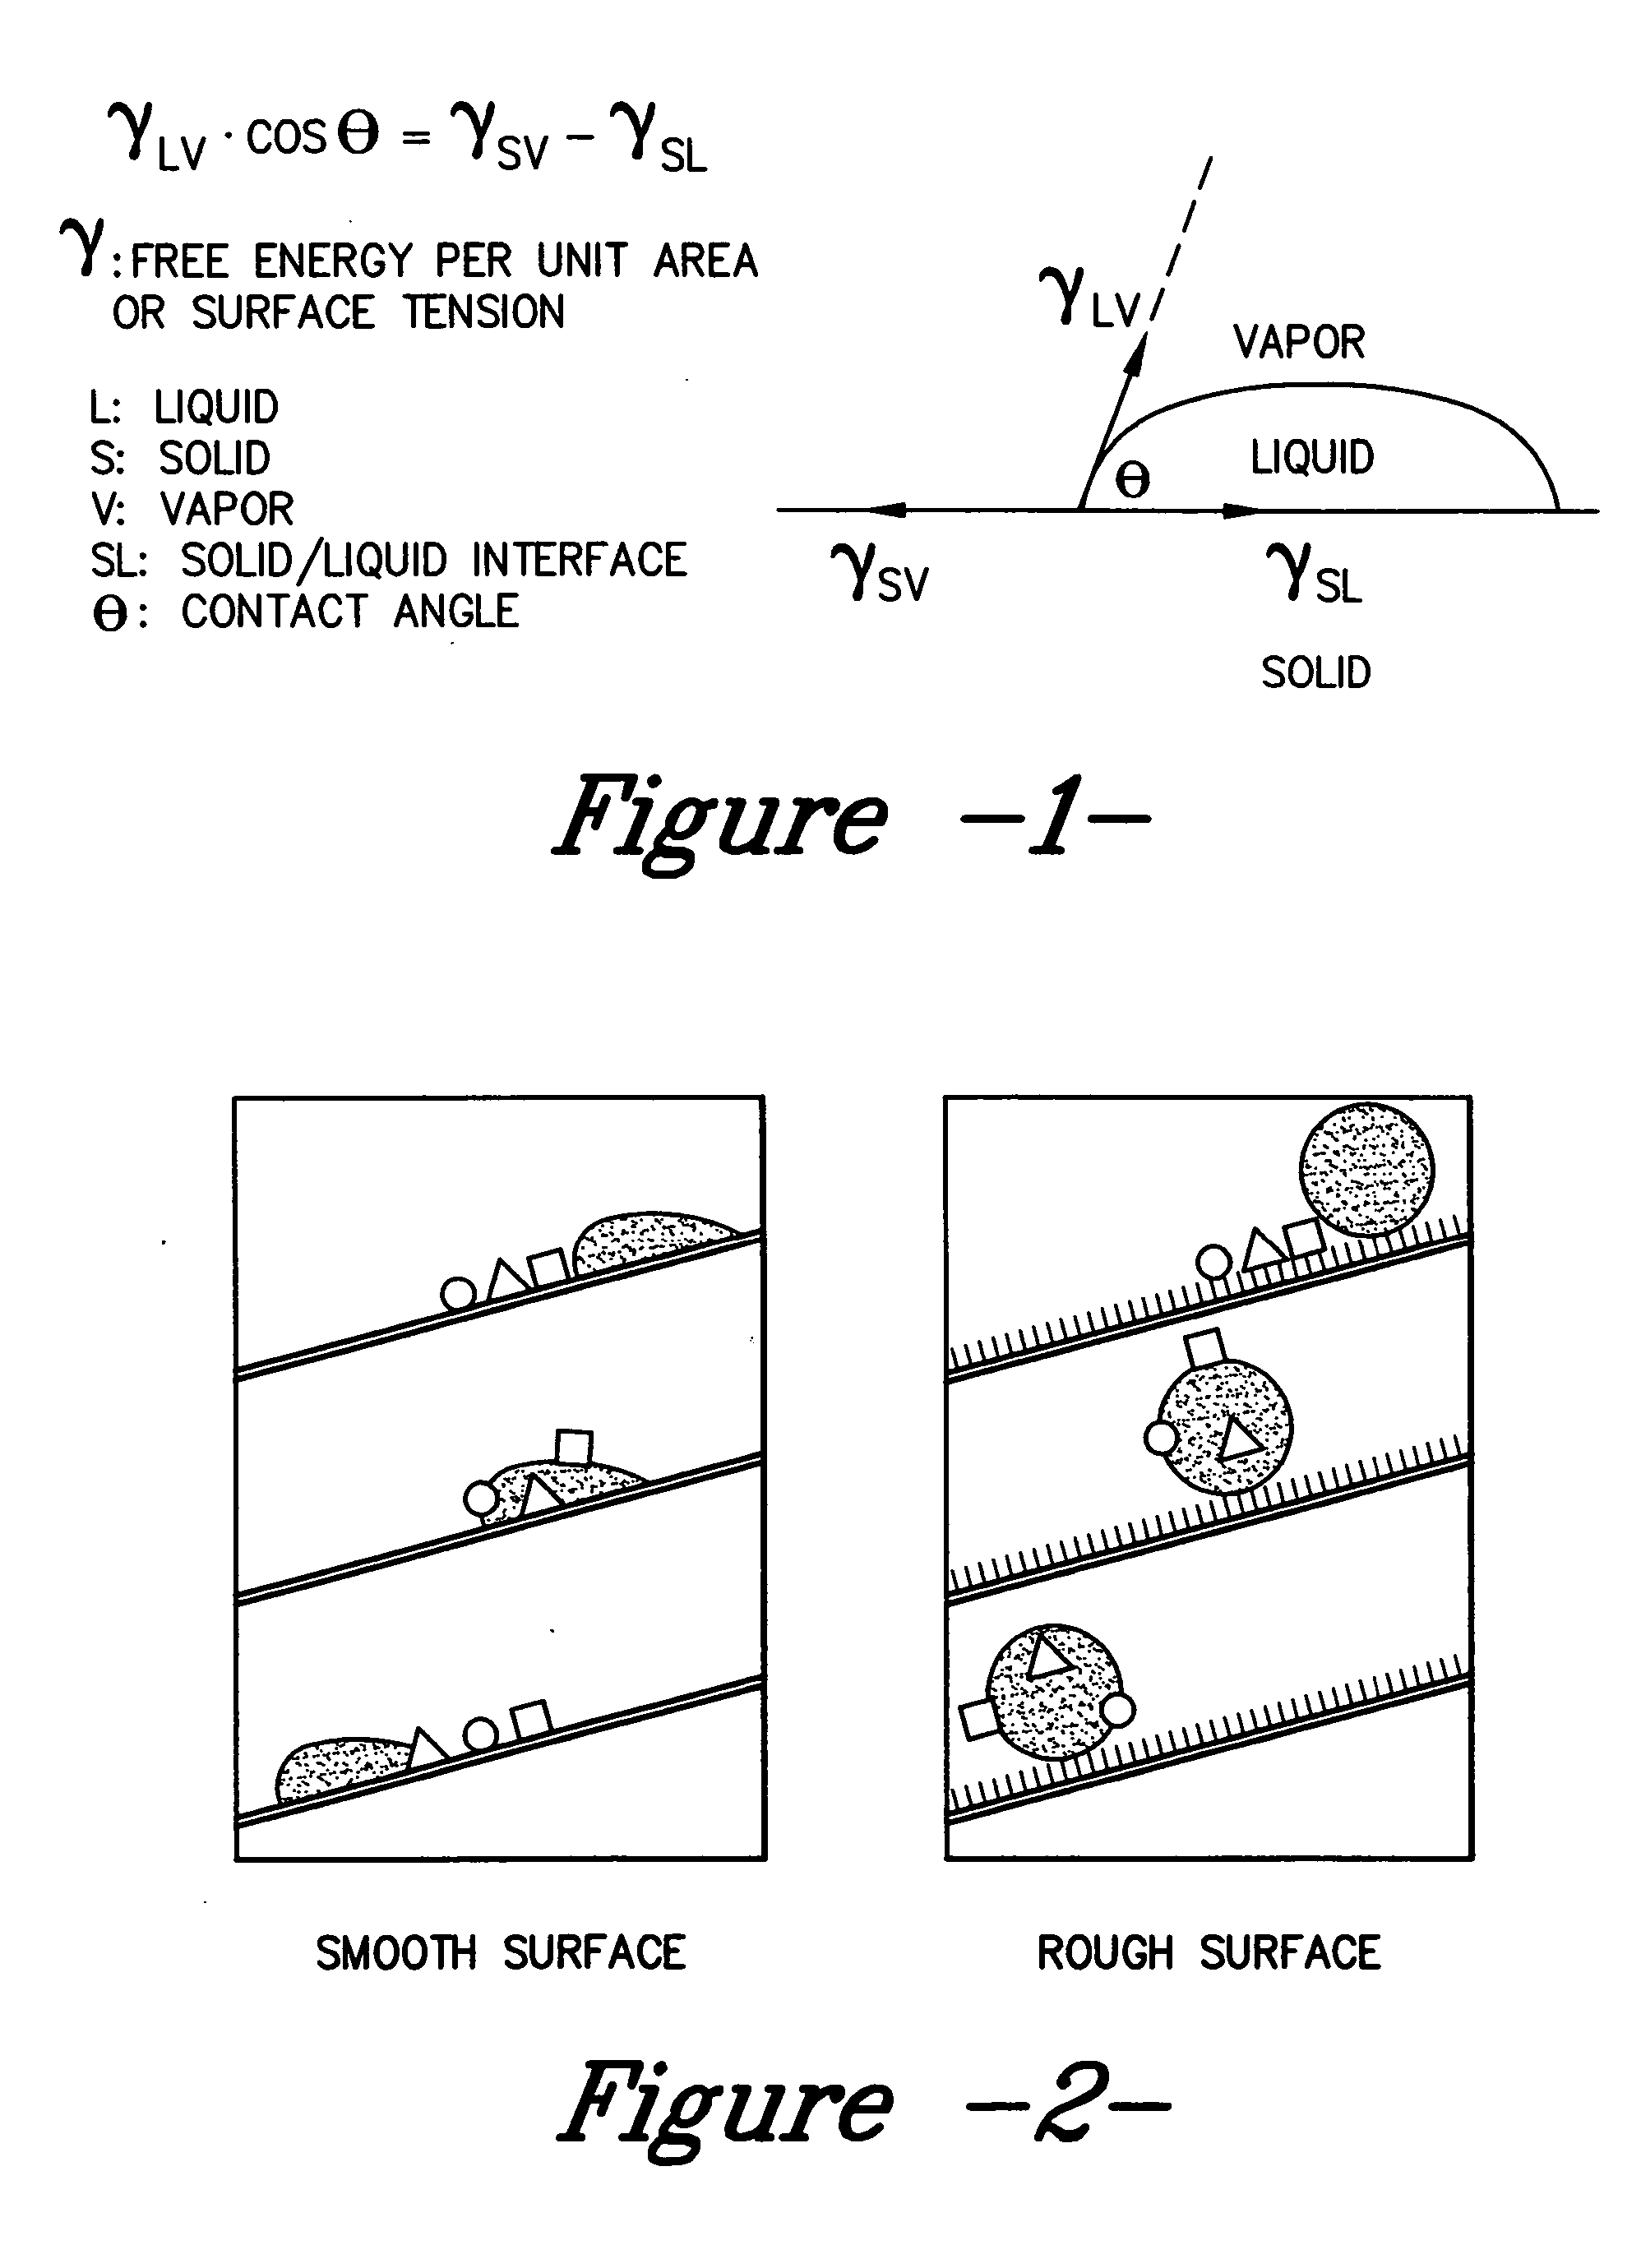 Treated textile substrate and method for making a textile substrate